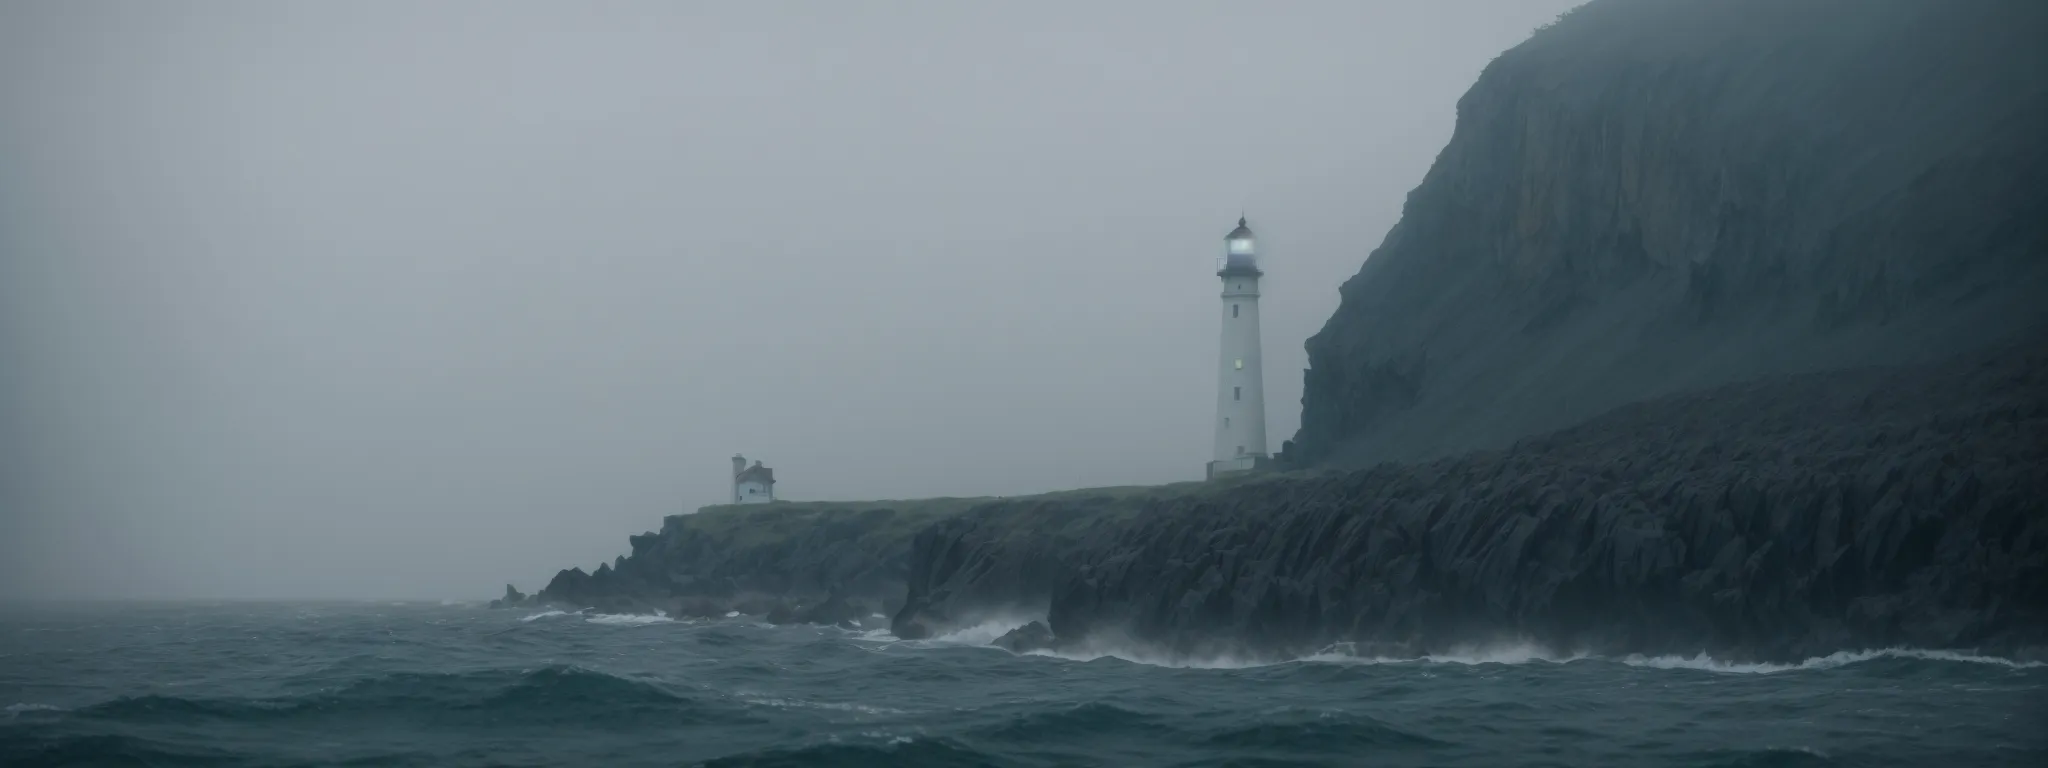 a lighthouse standing firm, with its light piercing through a veiling fog, signaling guidance and clarity amidst obscurity.